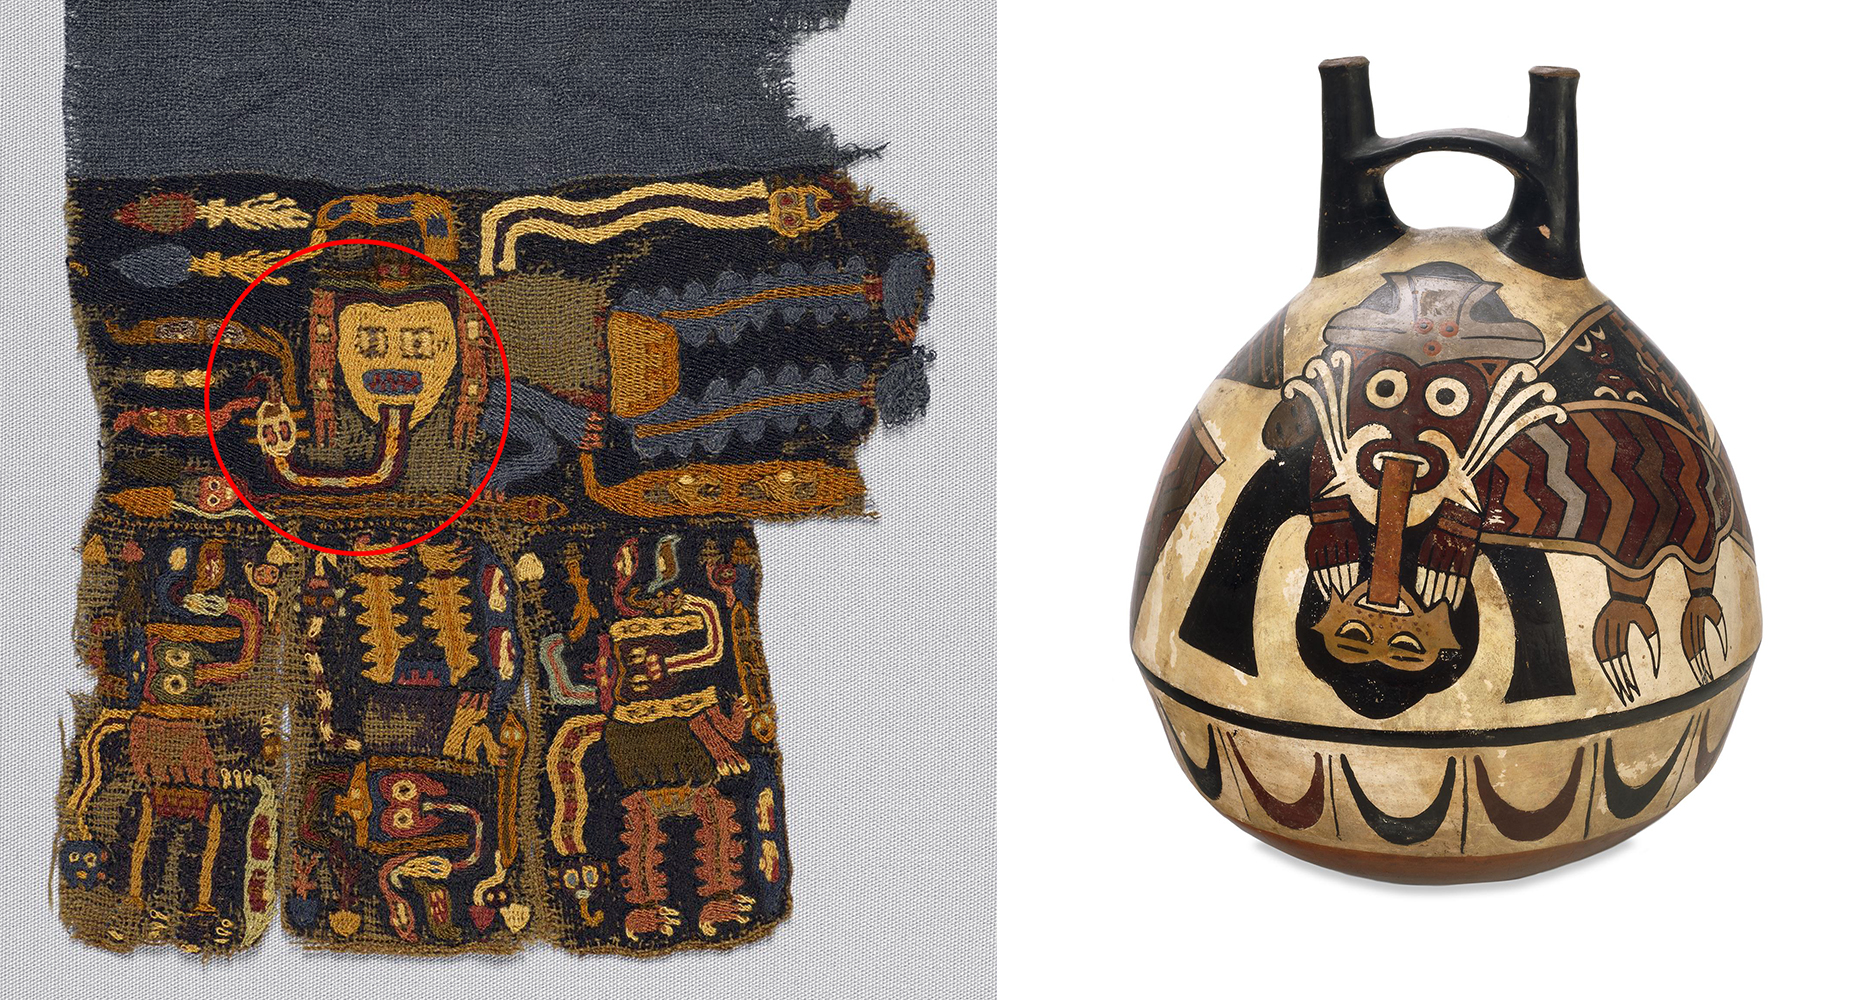 Left: Detail of a textile fragment with a head-tasting figure (circled in red), Probably Paracas, 200-600, cotton and camelid fiber, 10 1/4 x 6 11/16 inches (Brooklyn Museum); Right: Double spout-and-bridge vessel depicting a head-tasting bird deity, Nasca, 100 B.C.E. - 600 C.E., ceramic (British Museum, London, CC BY-NC-SA 4.0)